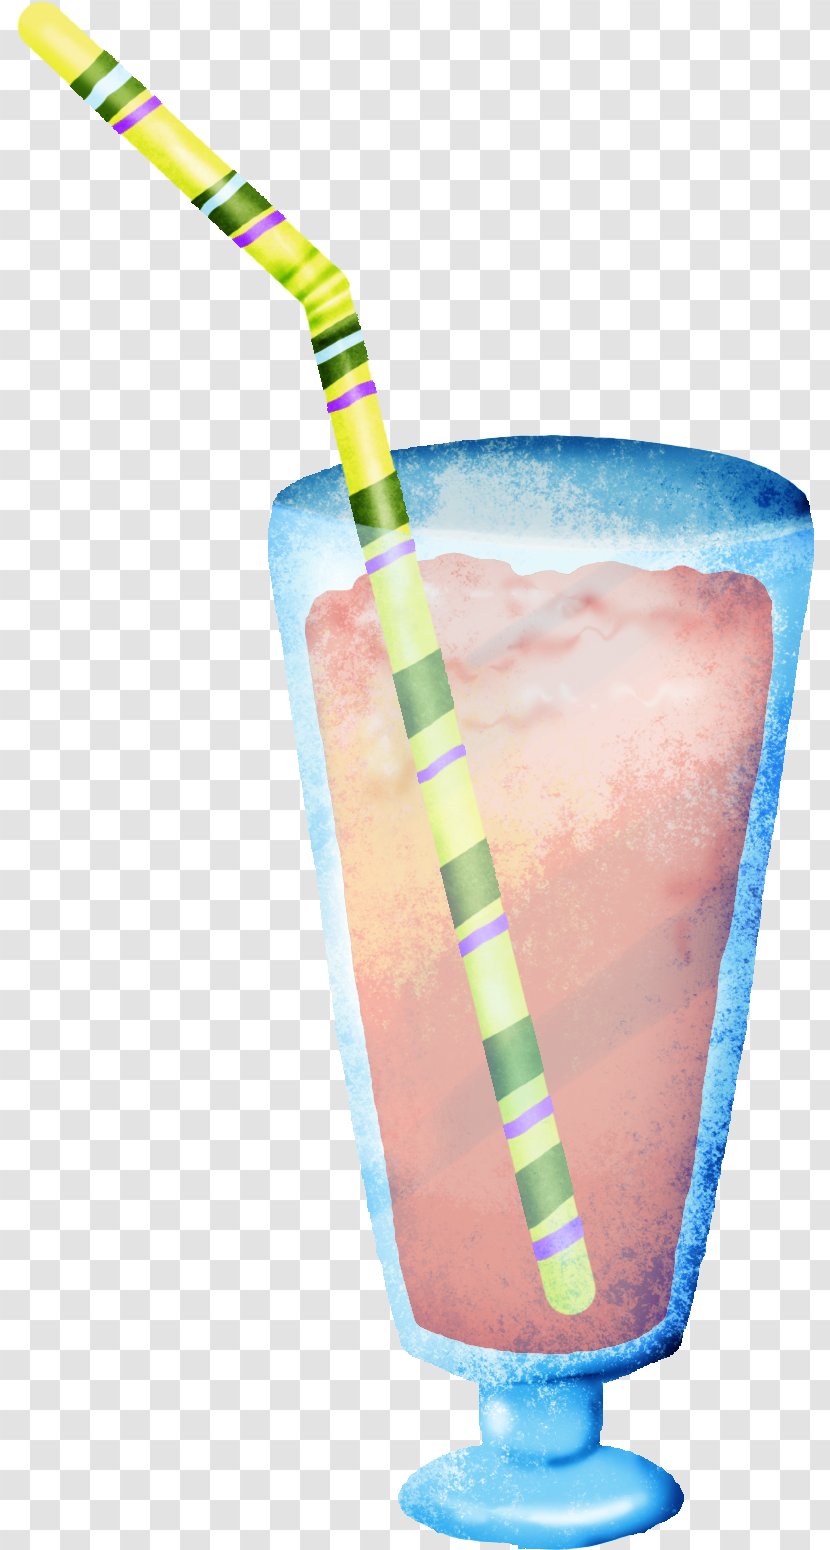 Juice Non-alcoholic Drink Drinking Straw Cup - Nonalcoholic - Summer Transparent PNG